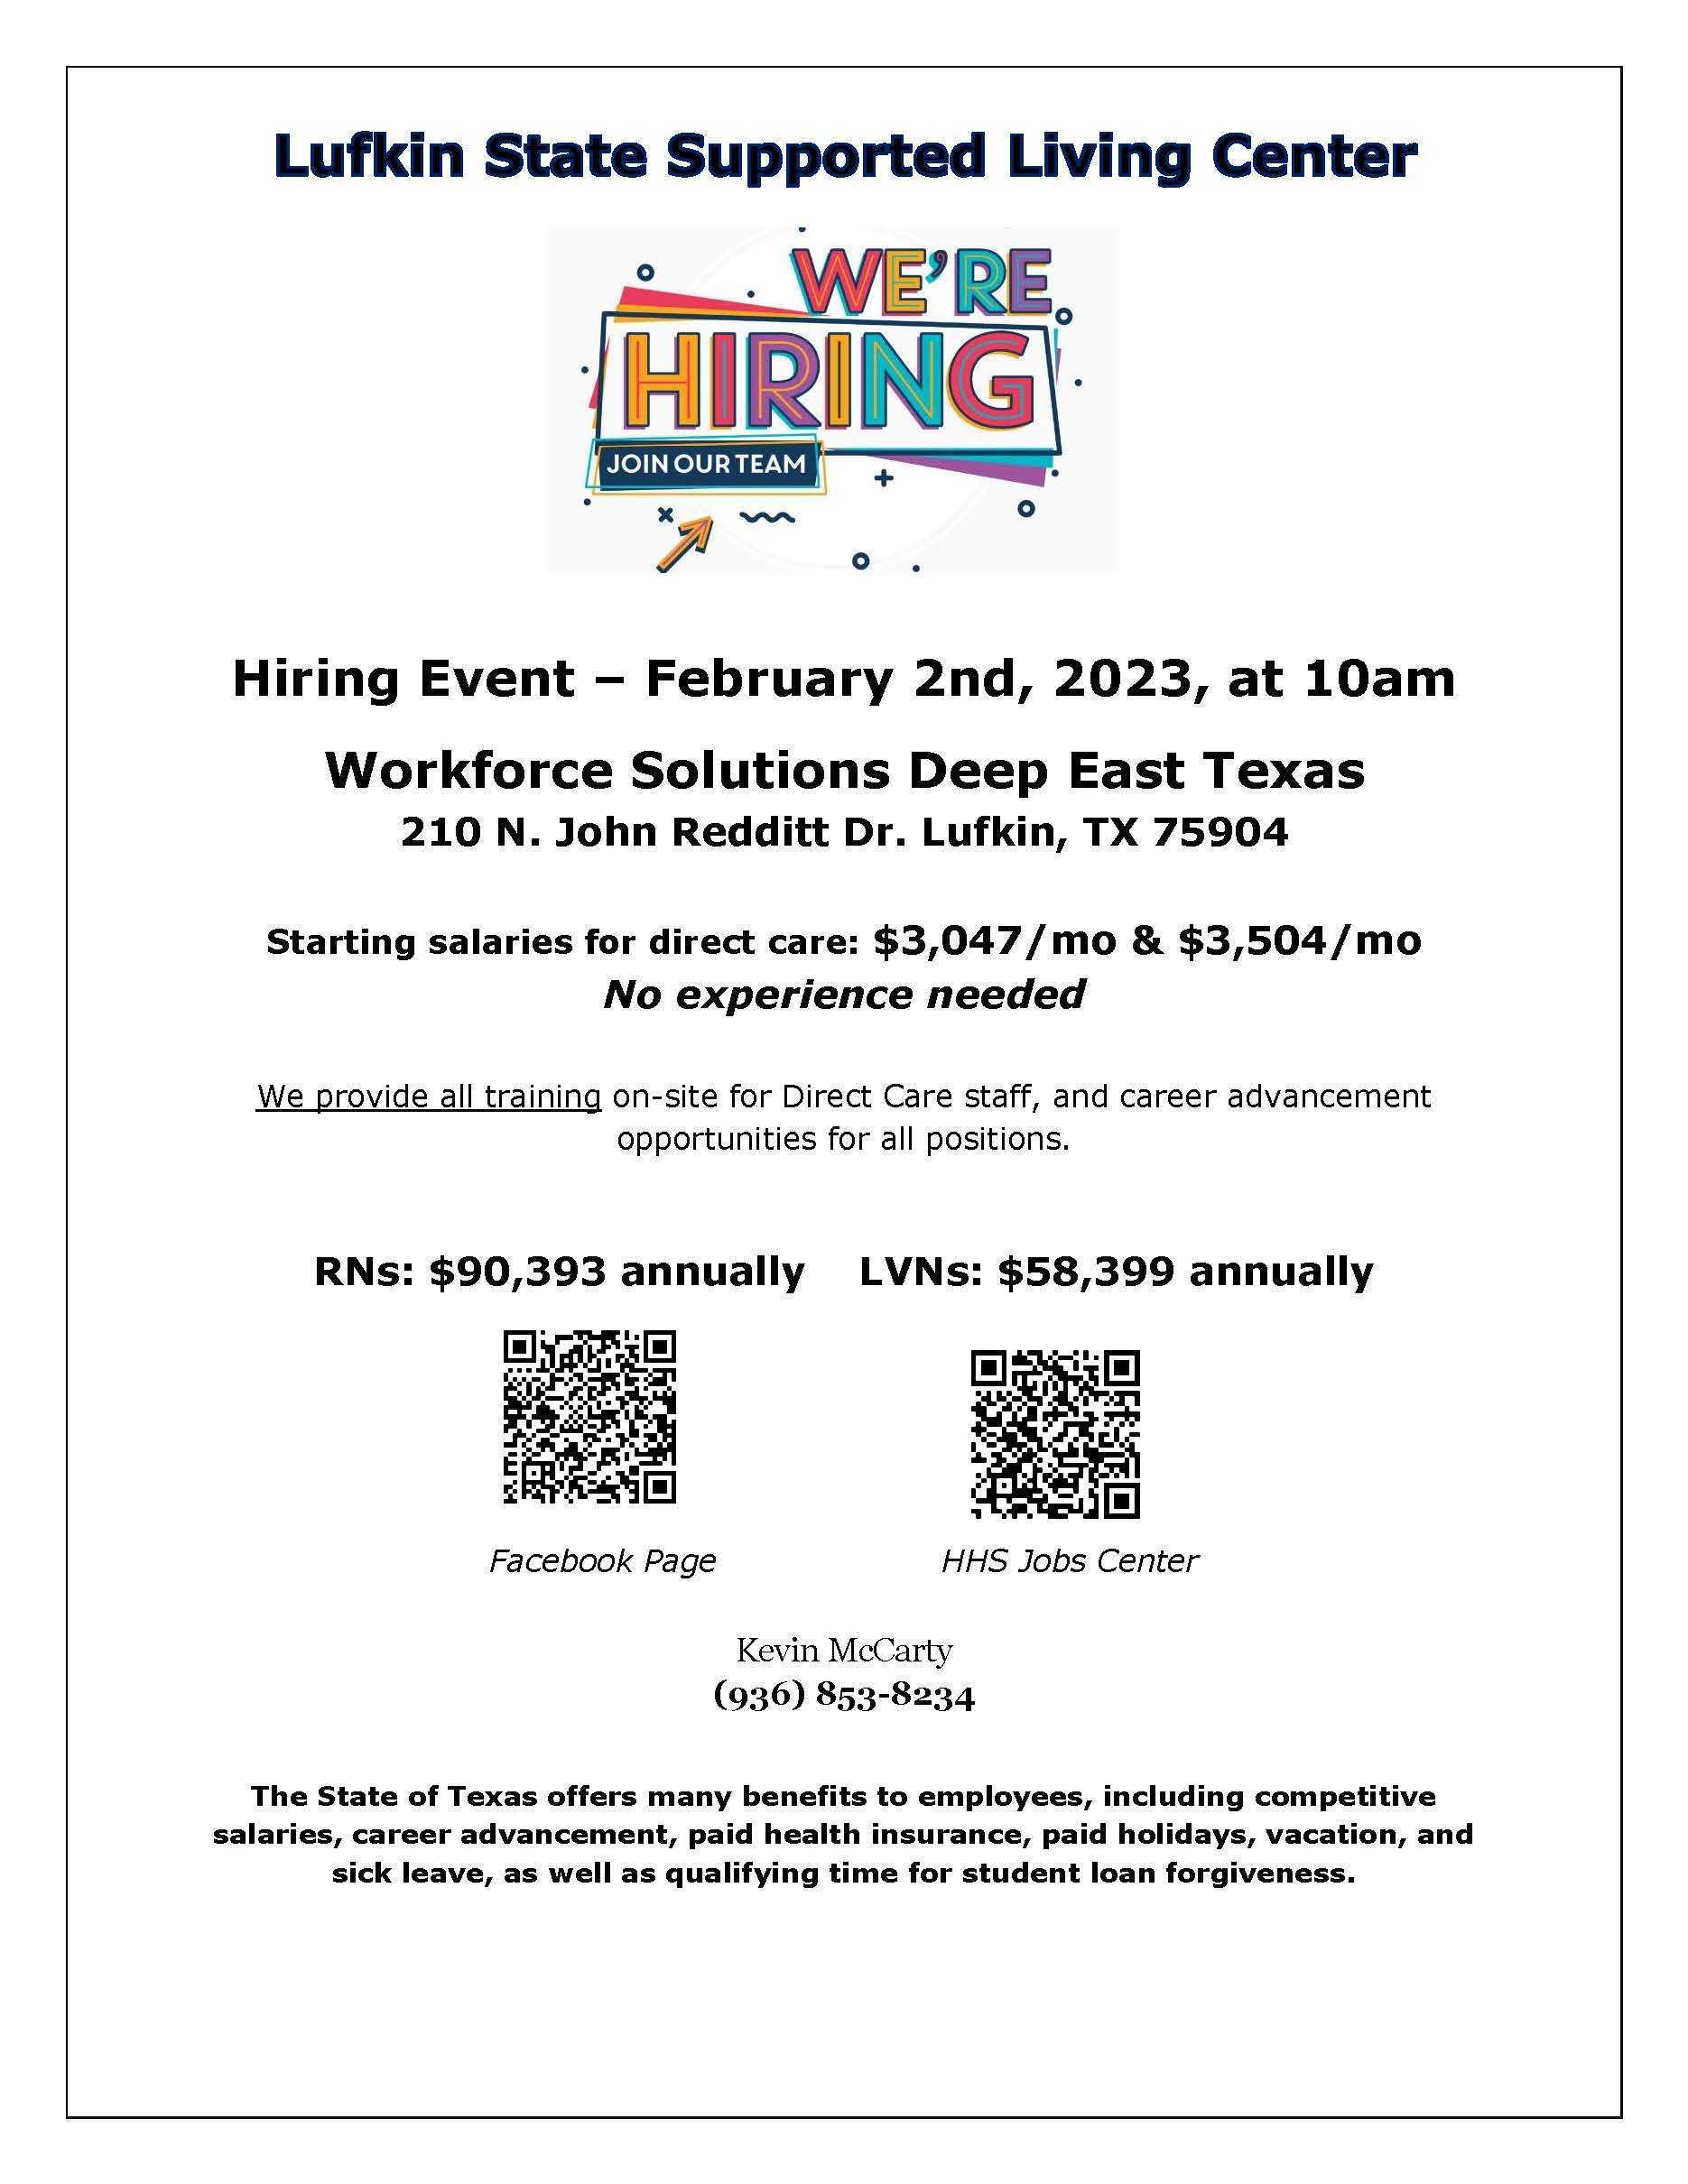 Hiring Event for Lufkin State Supported Living Center